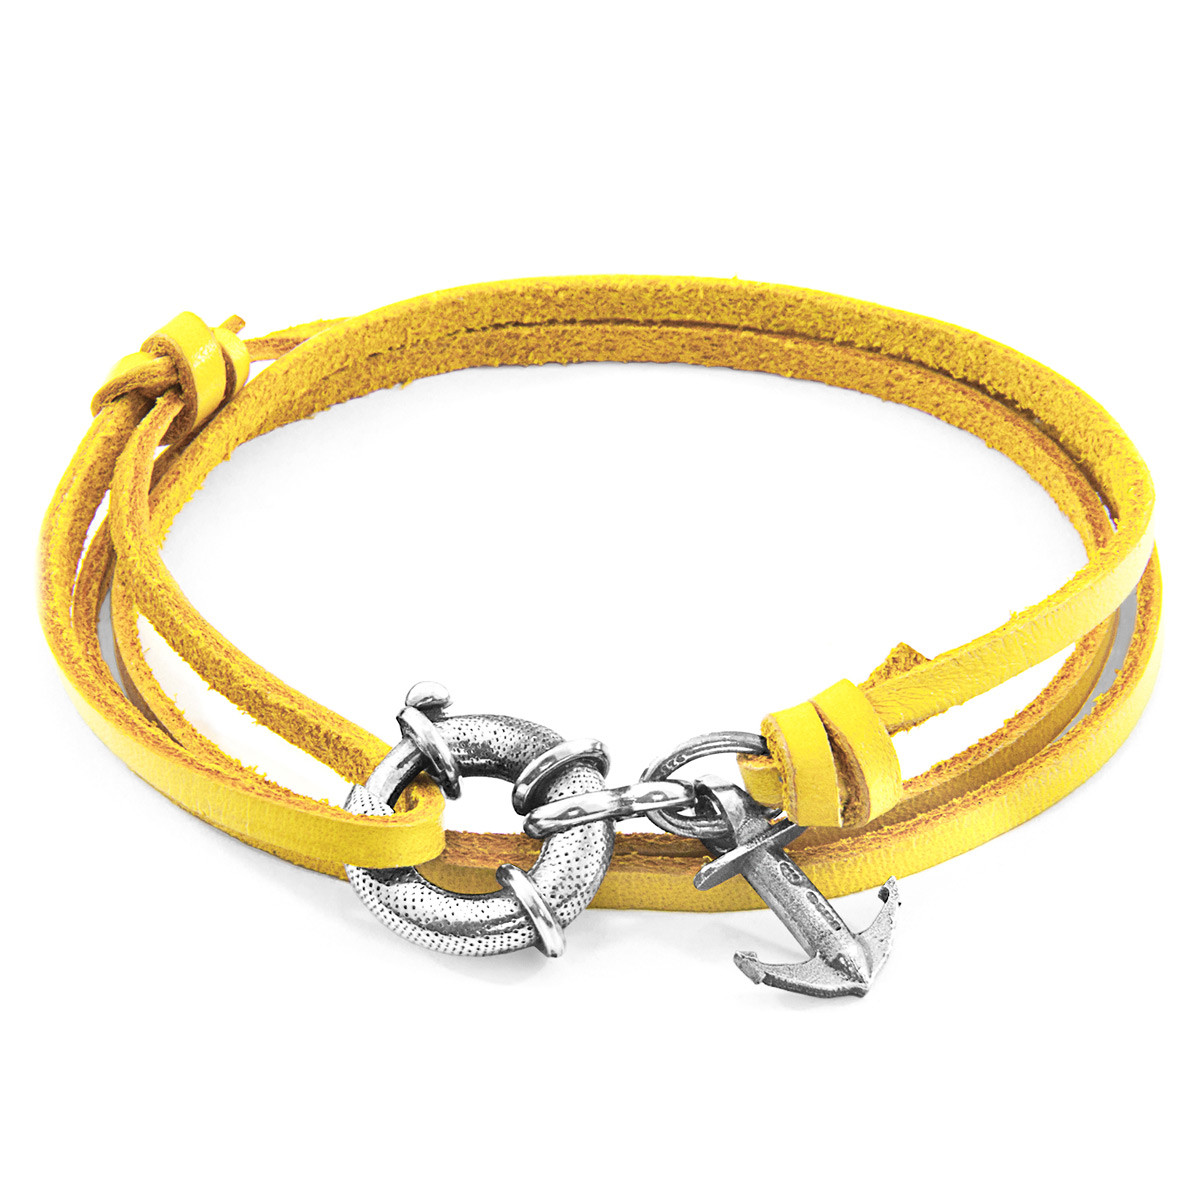 Mustard Yellow Clyde Anchor Silver and Flat Leather Bracelet